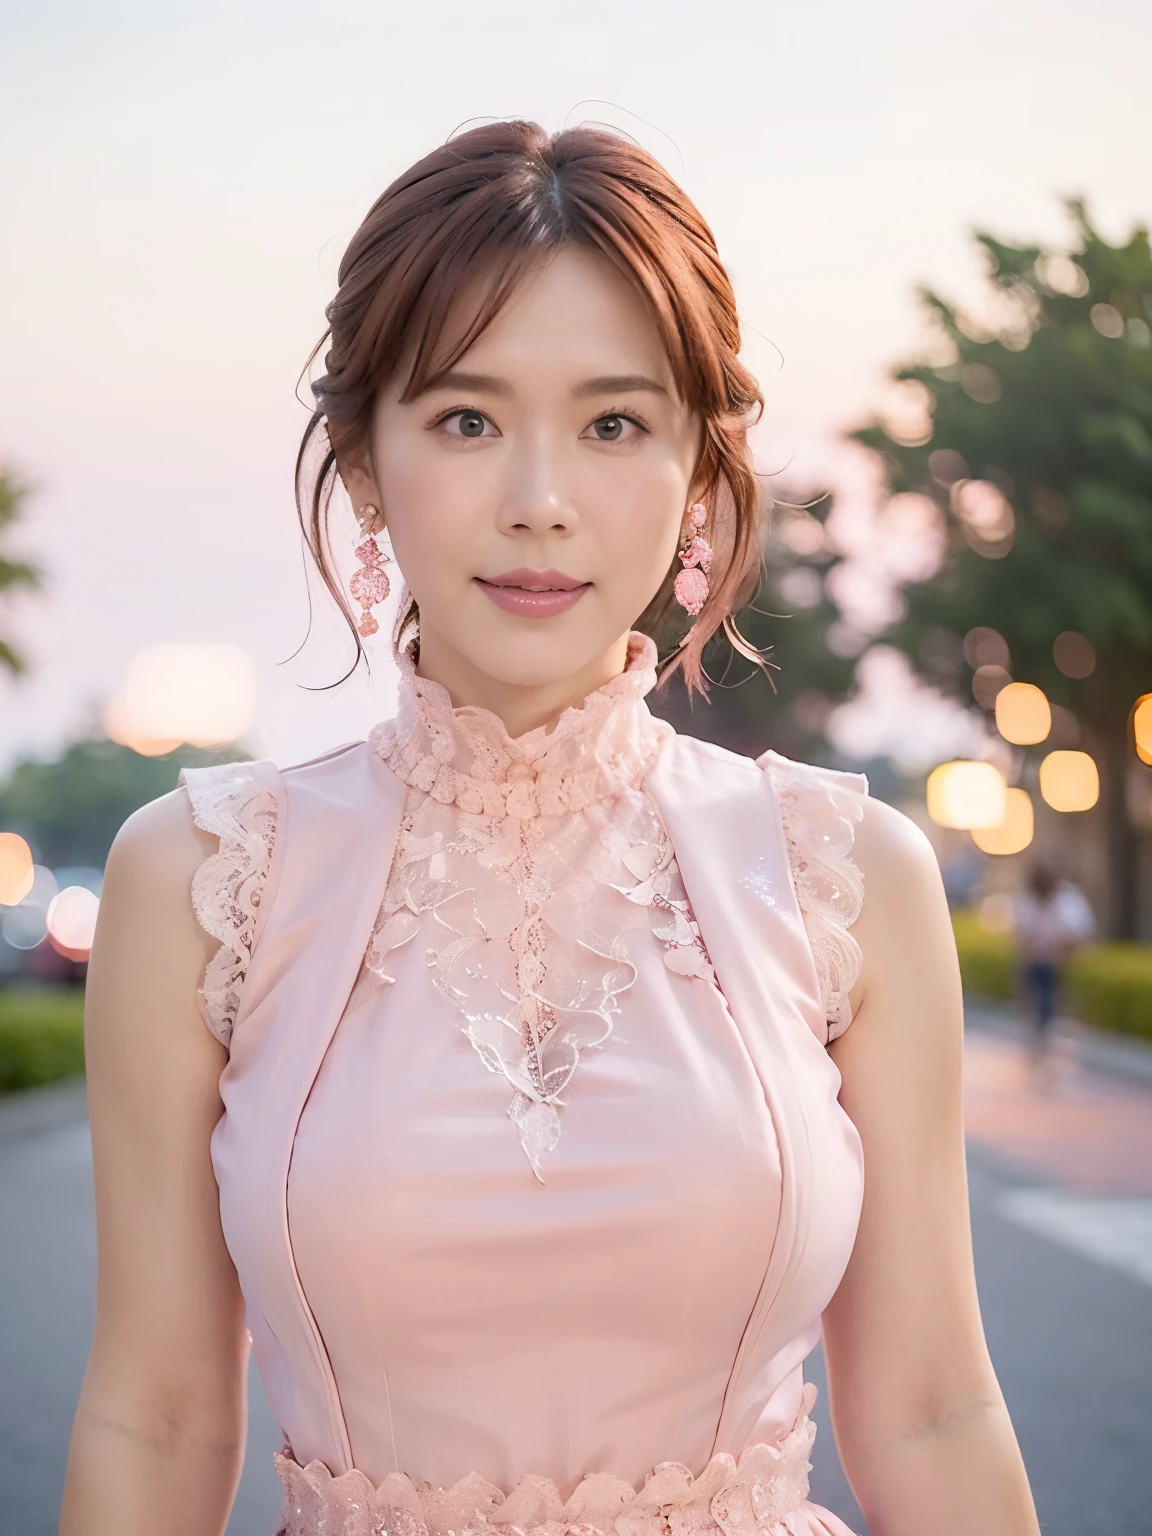 a woman posing on the street corner with Pink Dress on, highest quality, High resolution, 8k, 1people々々girl, (Huge breasts), Day, bright, Outdoor, (street:0.8), (people々々々, crowd:1), (Lace Trim Dresses:1.5, Pink clothes:1.5, Pink high neck dress:1.5, Sleeveless dress, Pink Dress: 1.5), Nice, (Medium Hair), Beautifully detailed skies, Beautiful earrings, (Dynamic pose:0.8), (Upper Body:1.2), Soft lighting, Wind, Shiny skin, View your viewers,  